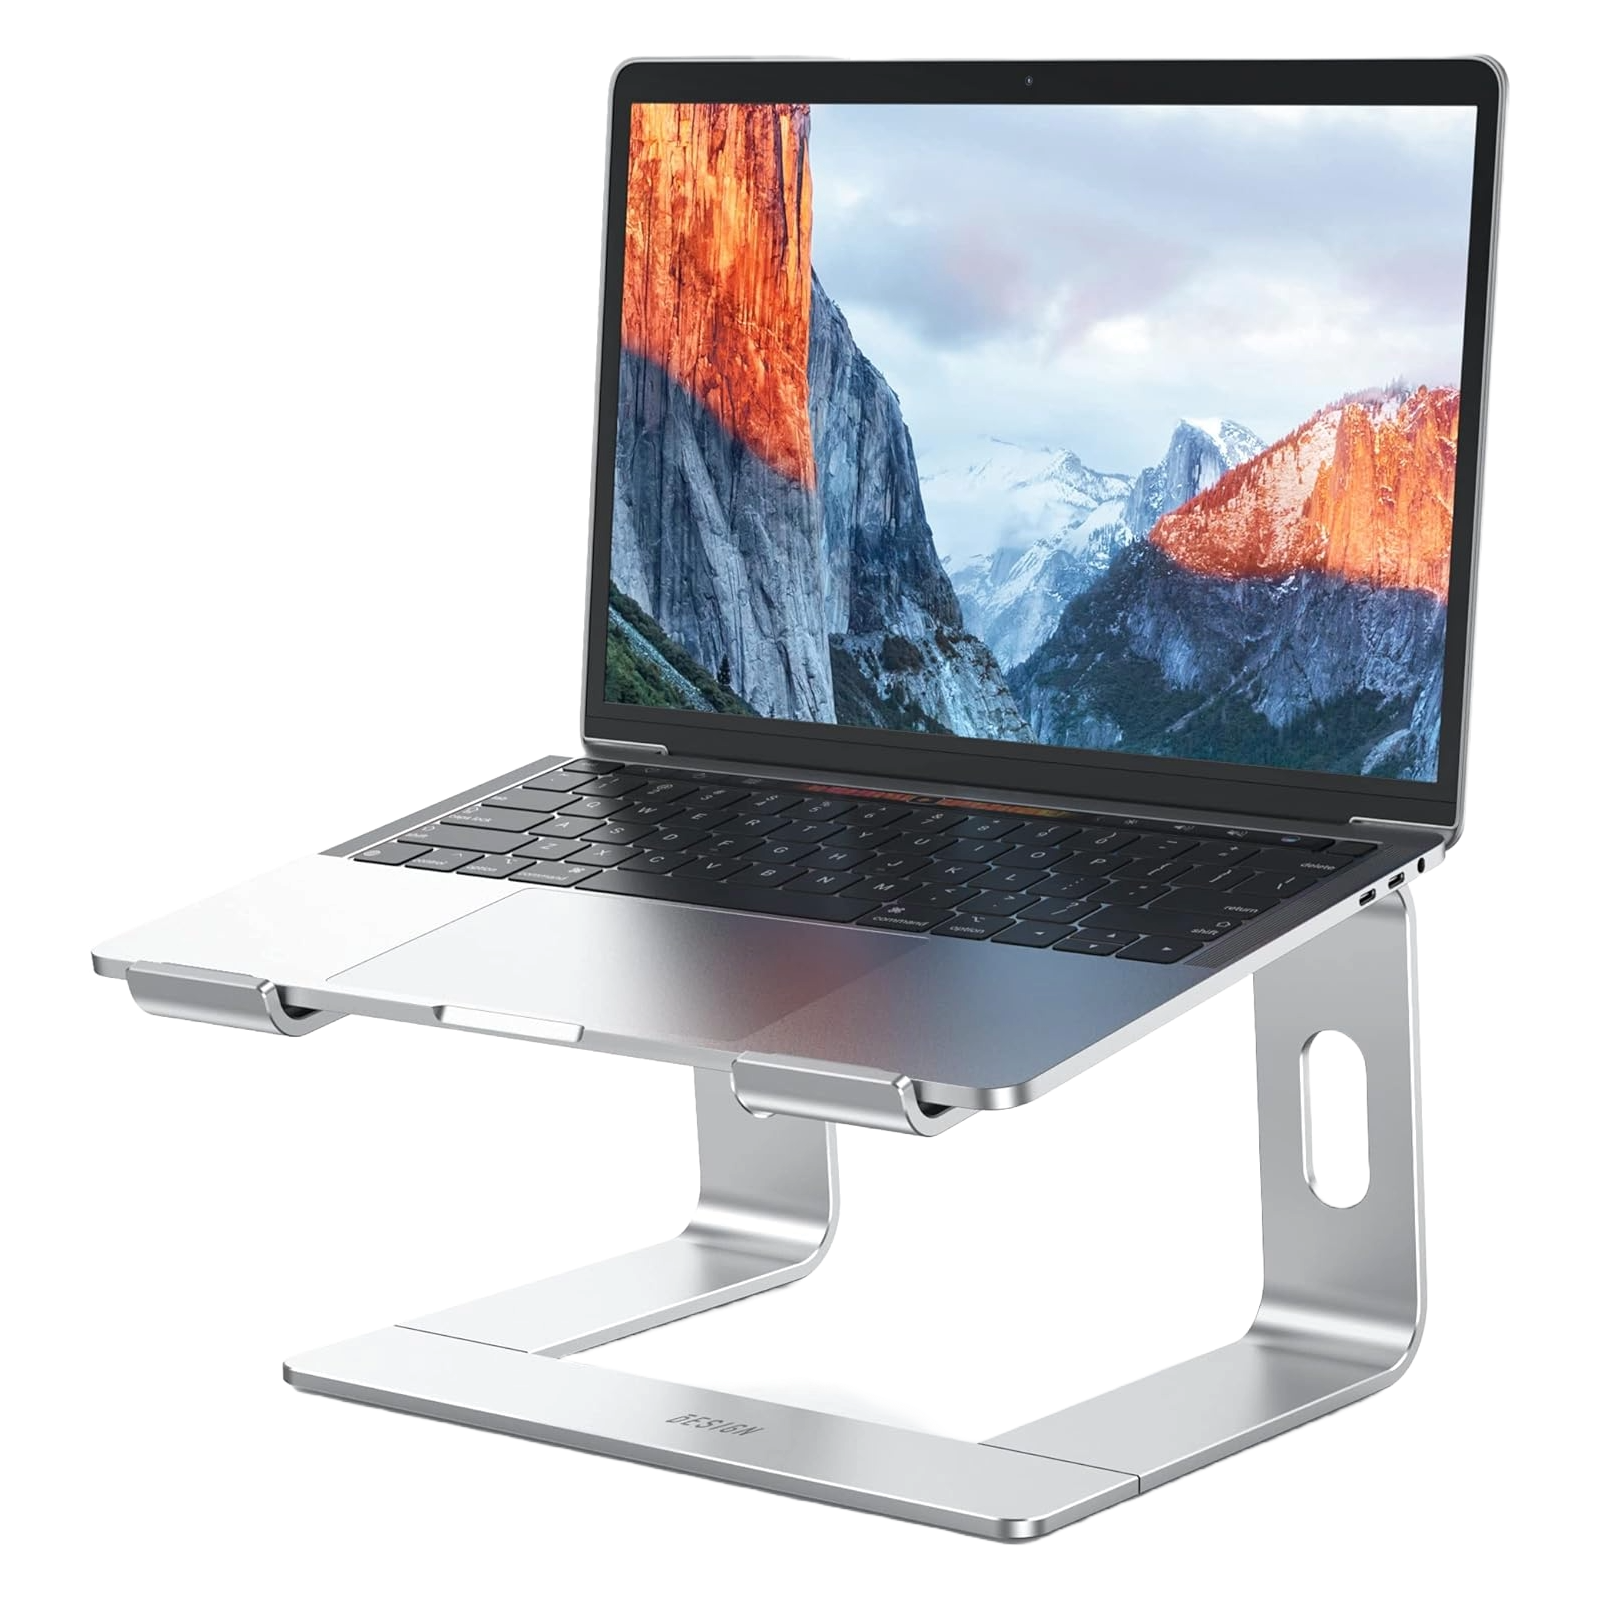 The Besign LS03 Aluminum Laptop Stand holding a MacBook.